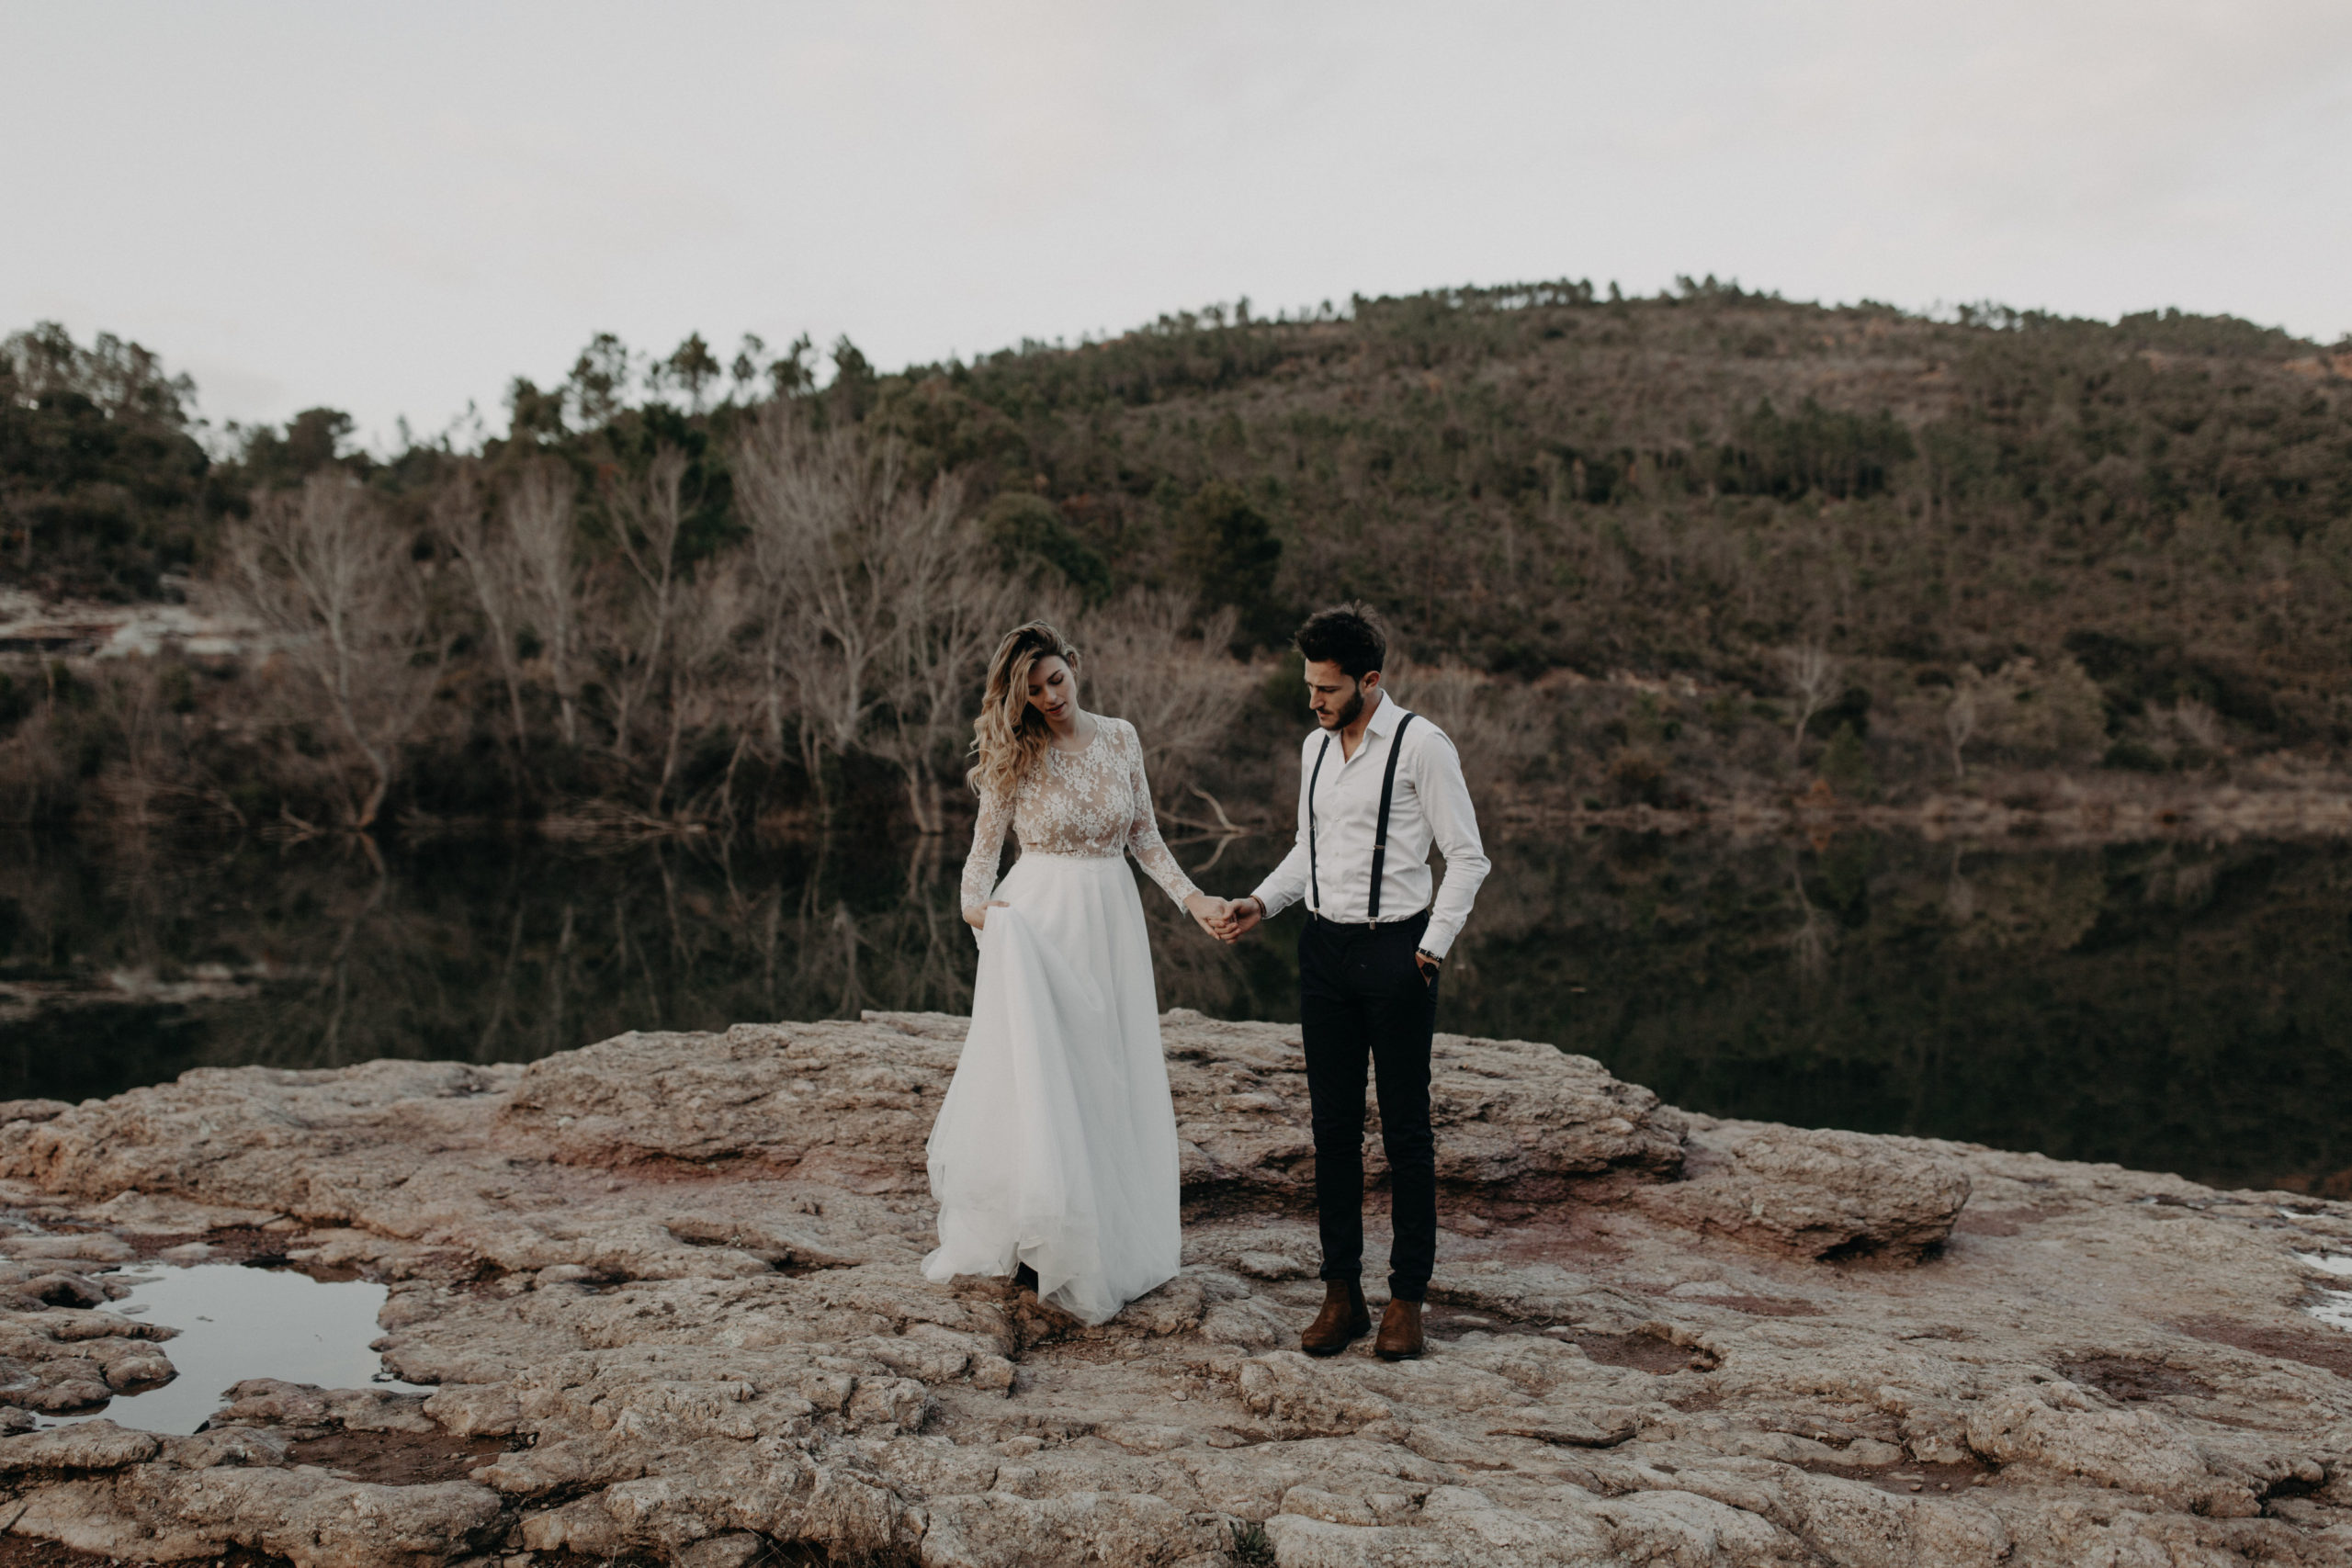 View More: http://lesleysphotography.pass.us/marine-maxime-elopement